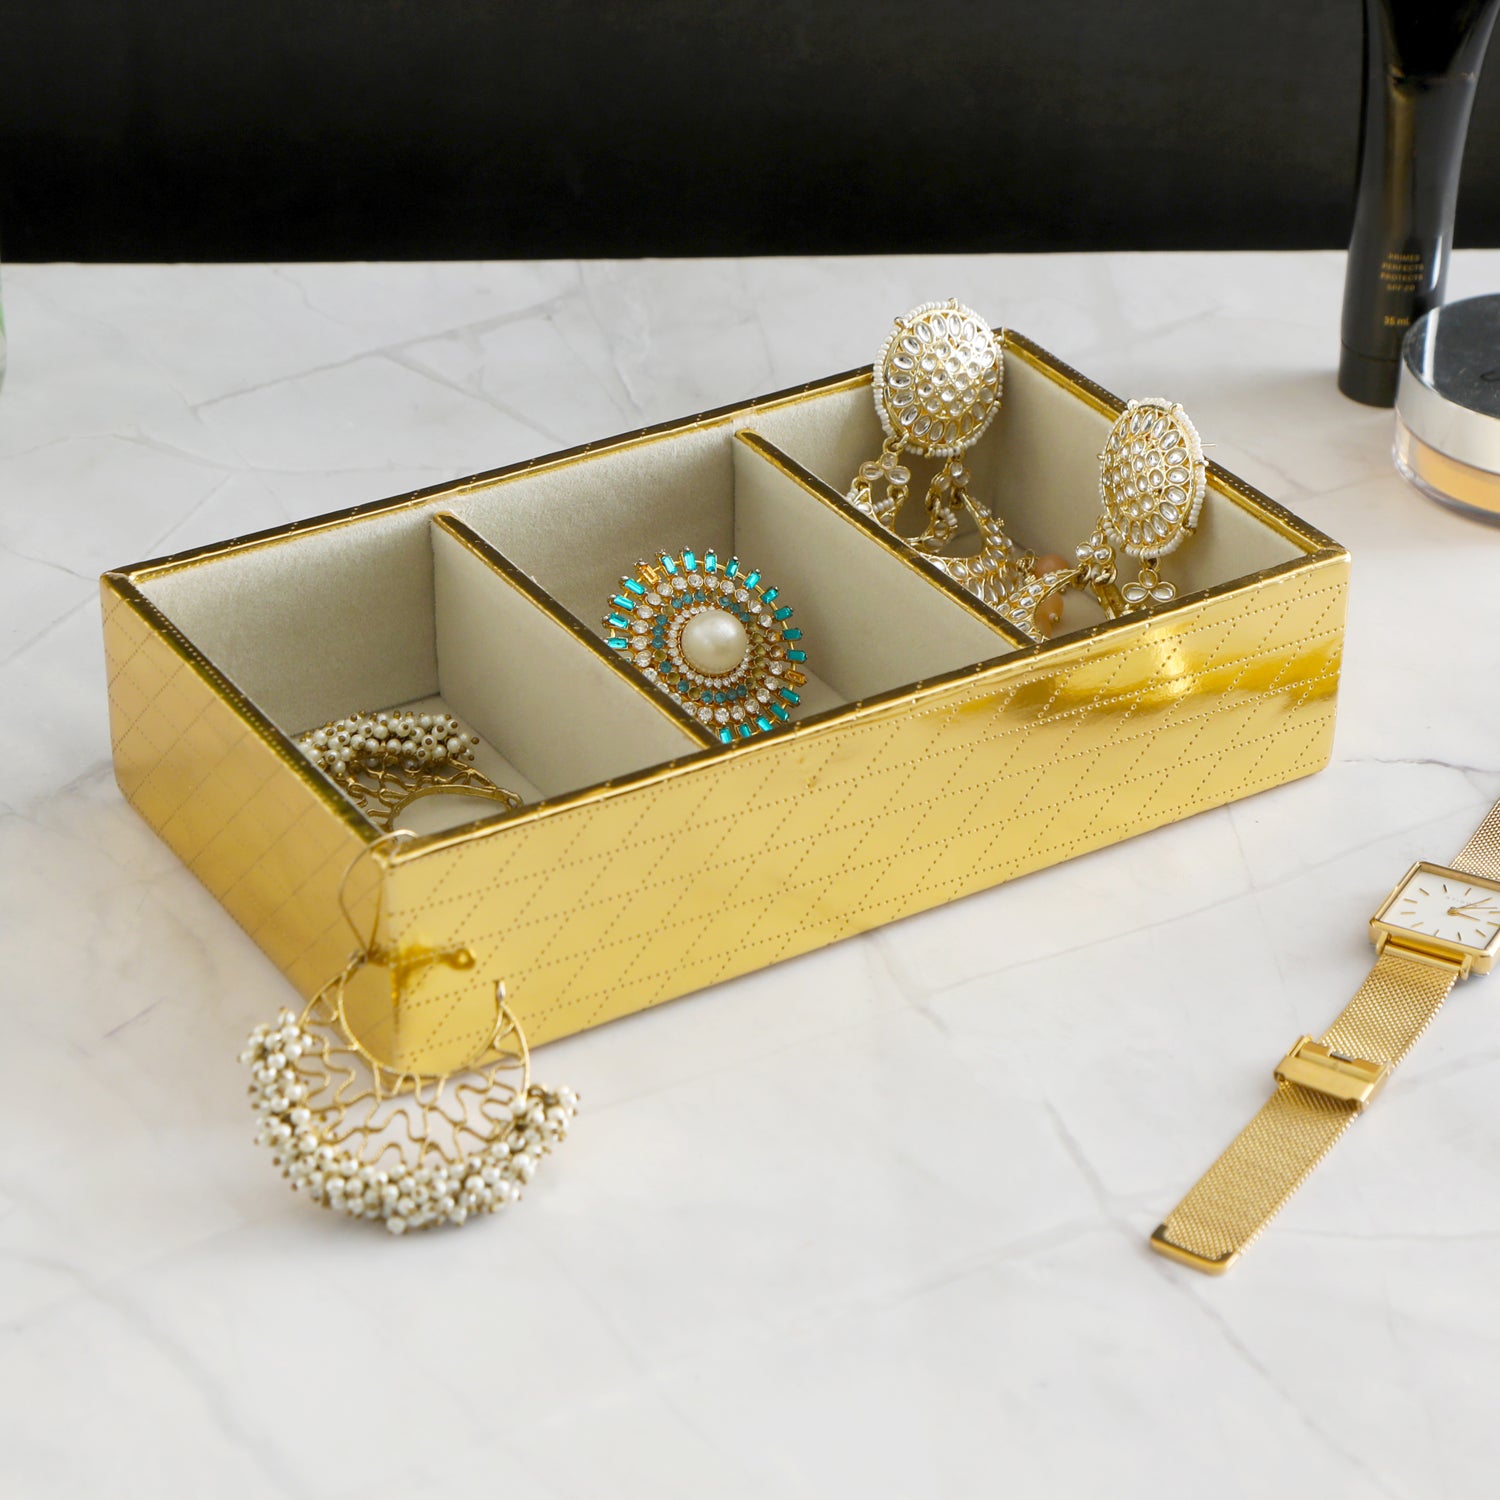 Jewellery Tray 3 Partition - Gold Jewellery Organiser - The Home Co.